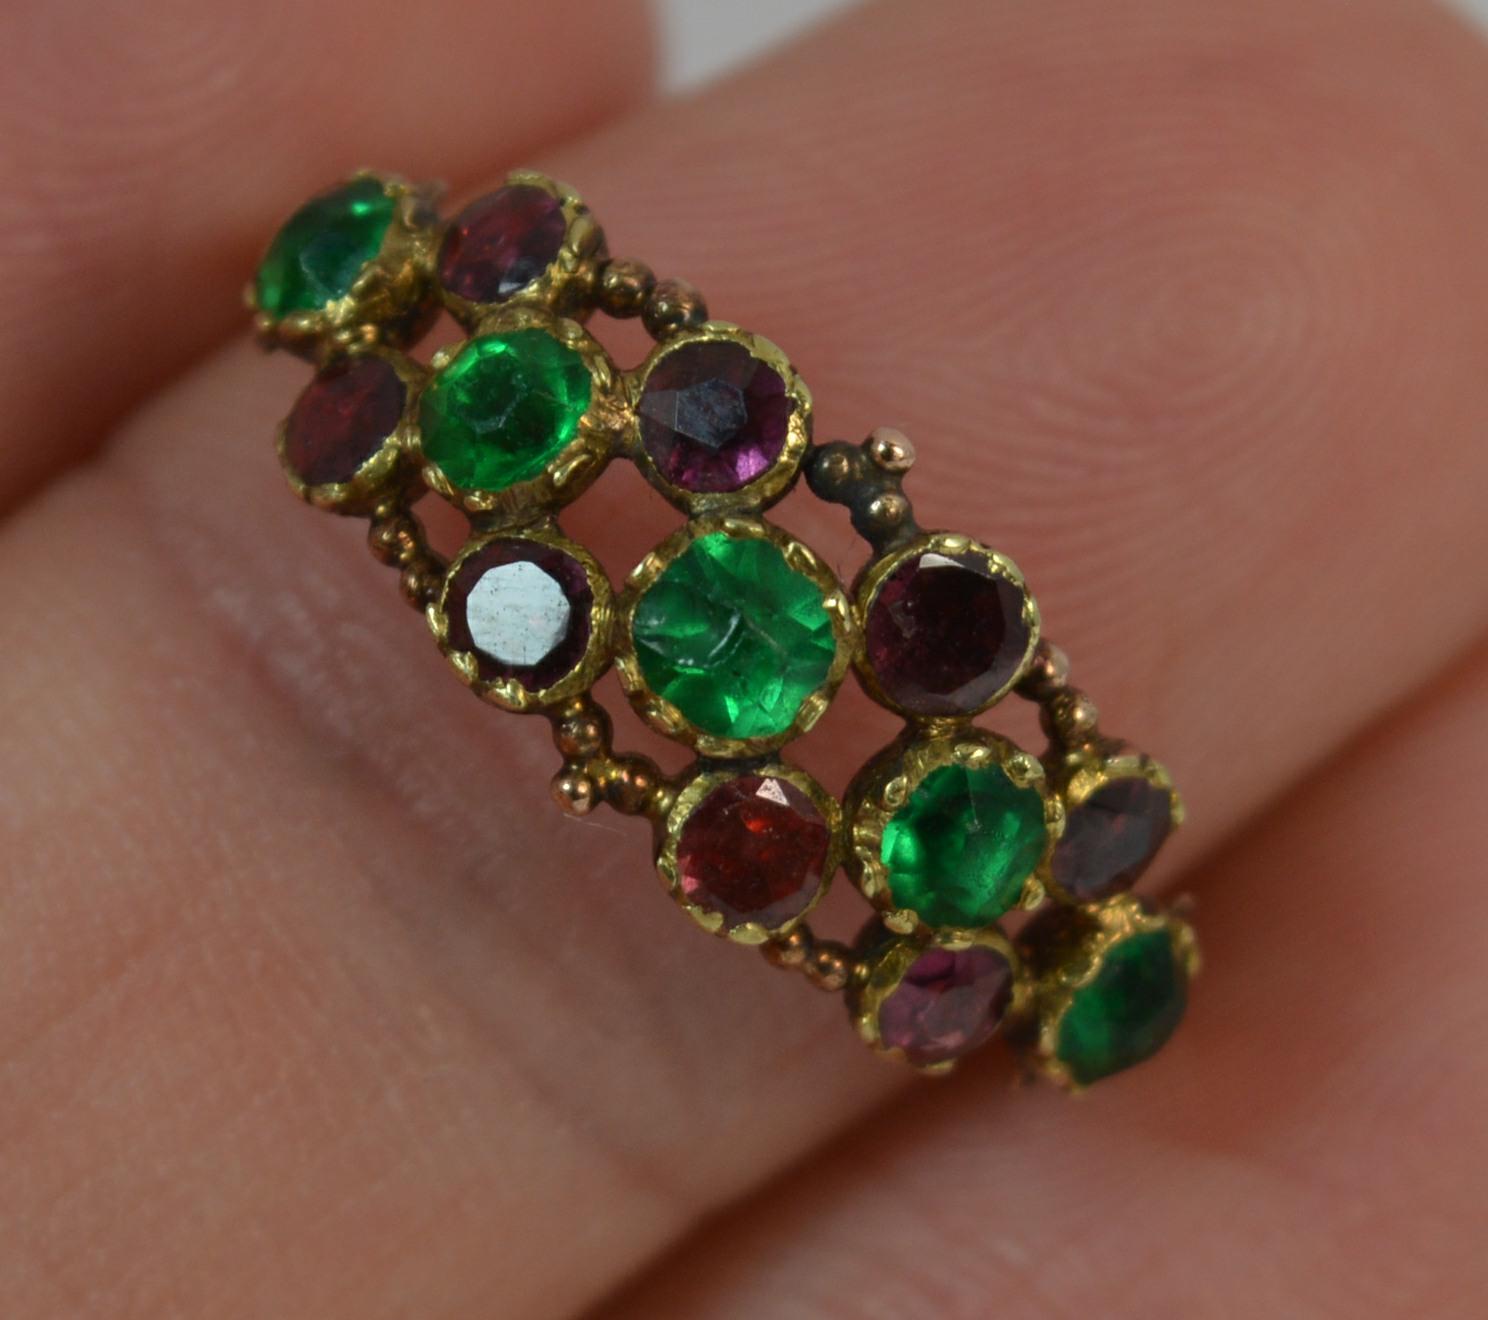 A genuine Georgian period ring.
SIZE ; N UK, 6 3/4 US
Designed with three rows of stones. Five vibrant green paste stones to the centre with a row of round flat cut garnets above and below. All in closed back settings.

19mm x 8mm cluster